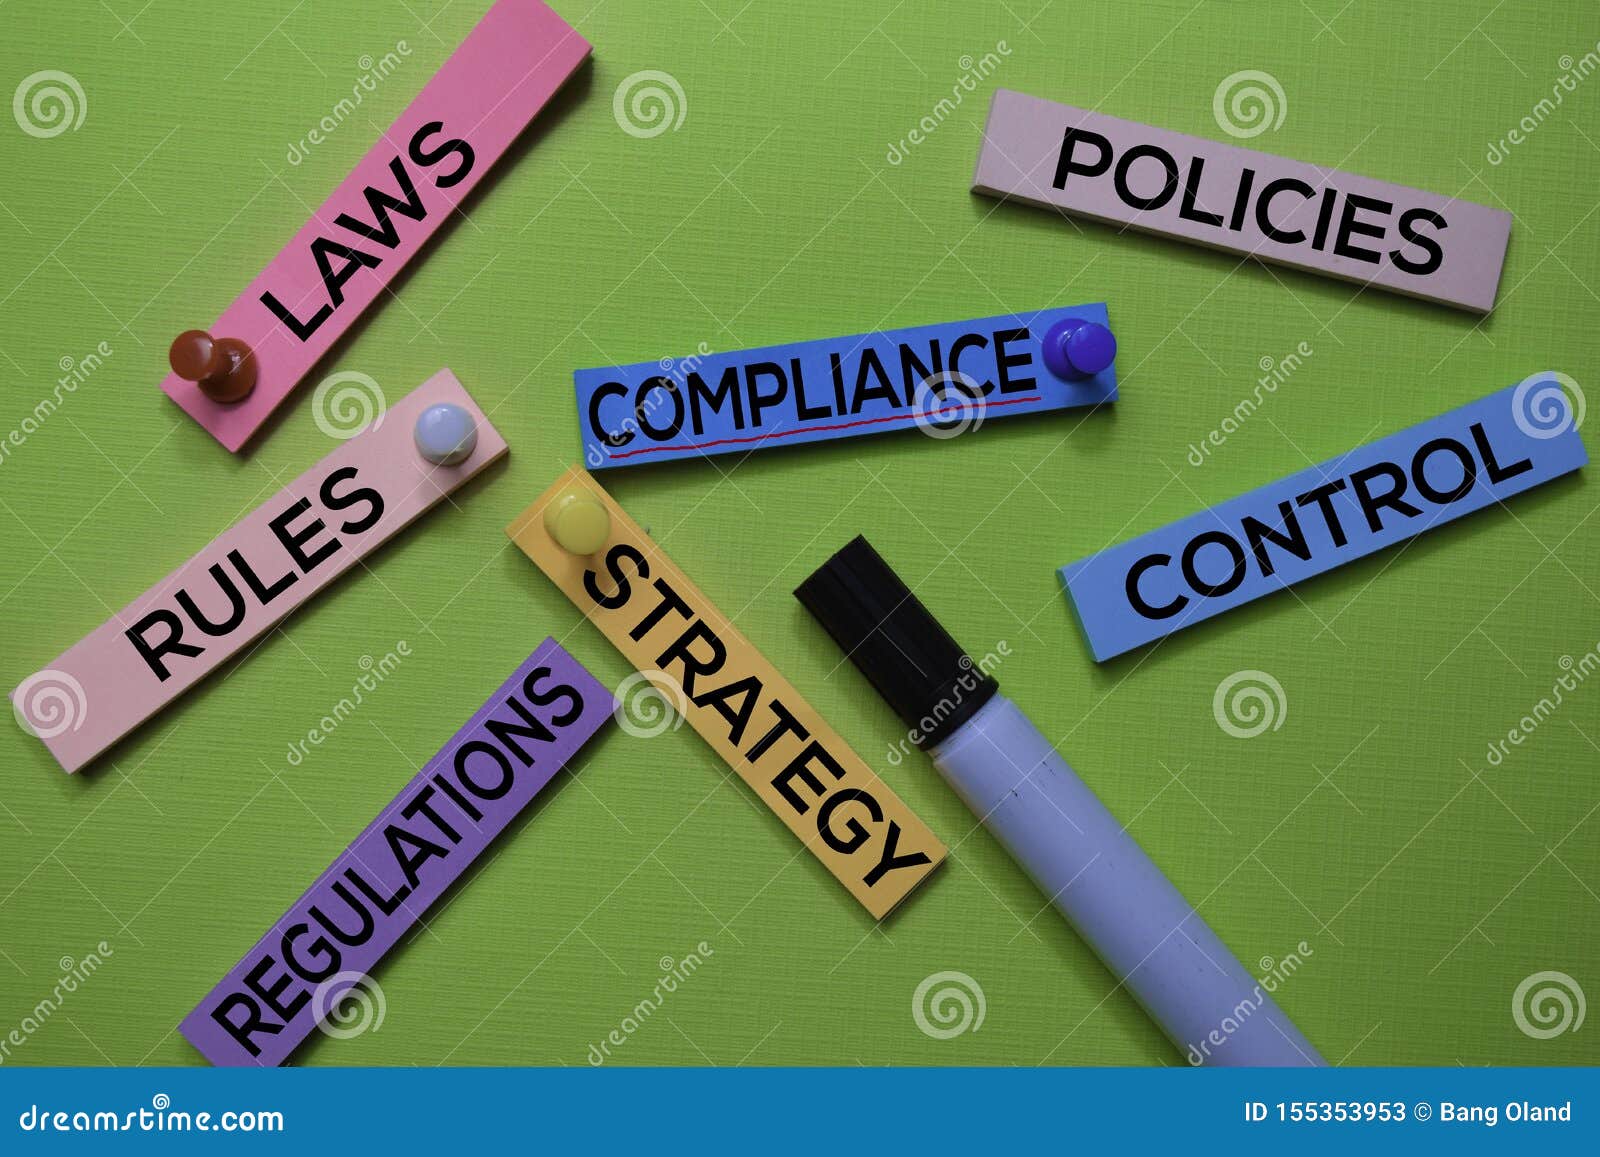 laws, compliance, policies, rules, strategy, regulations, control text on sticky notes  on green desk. mechanism strategy